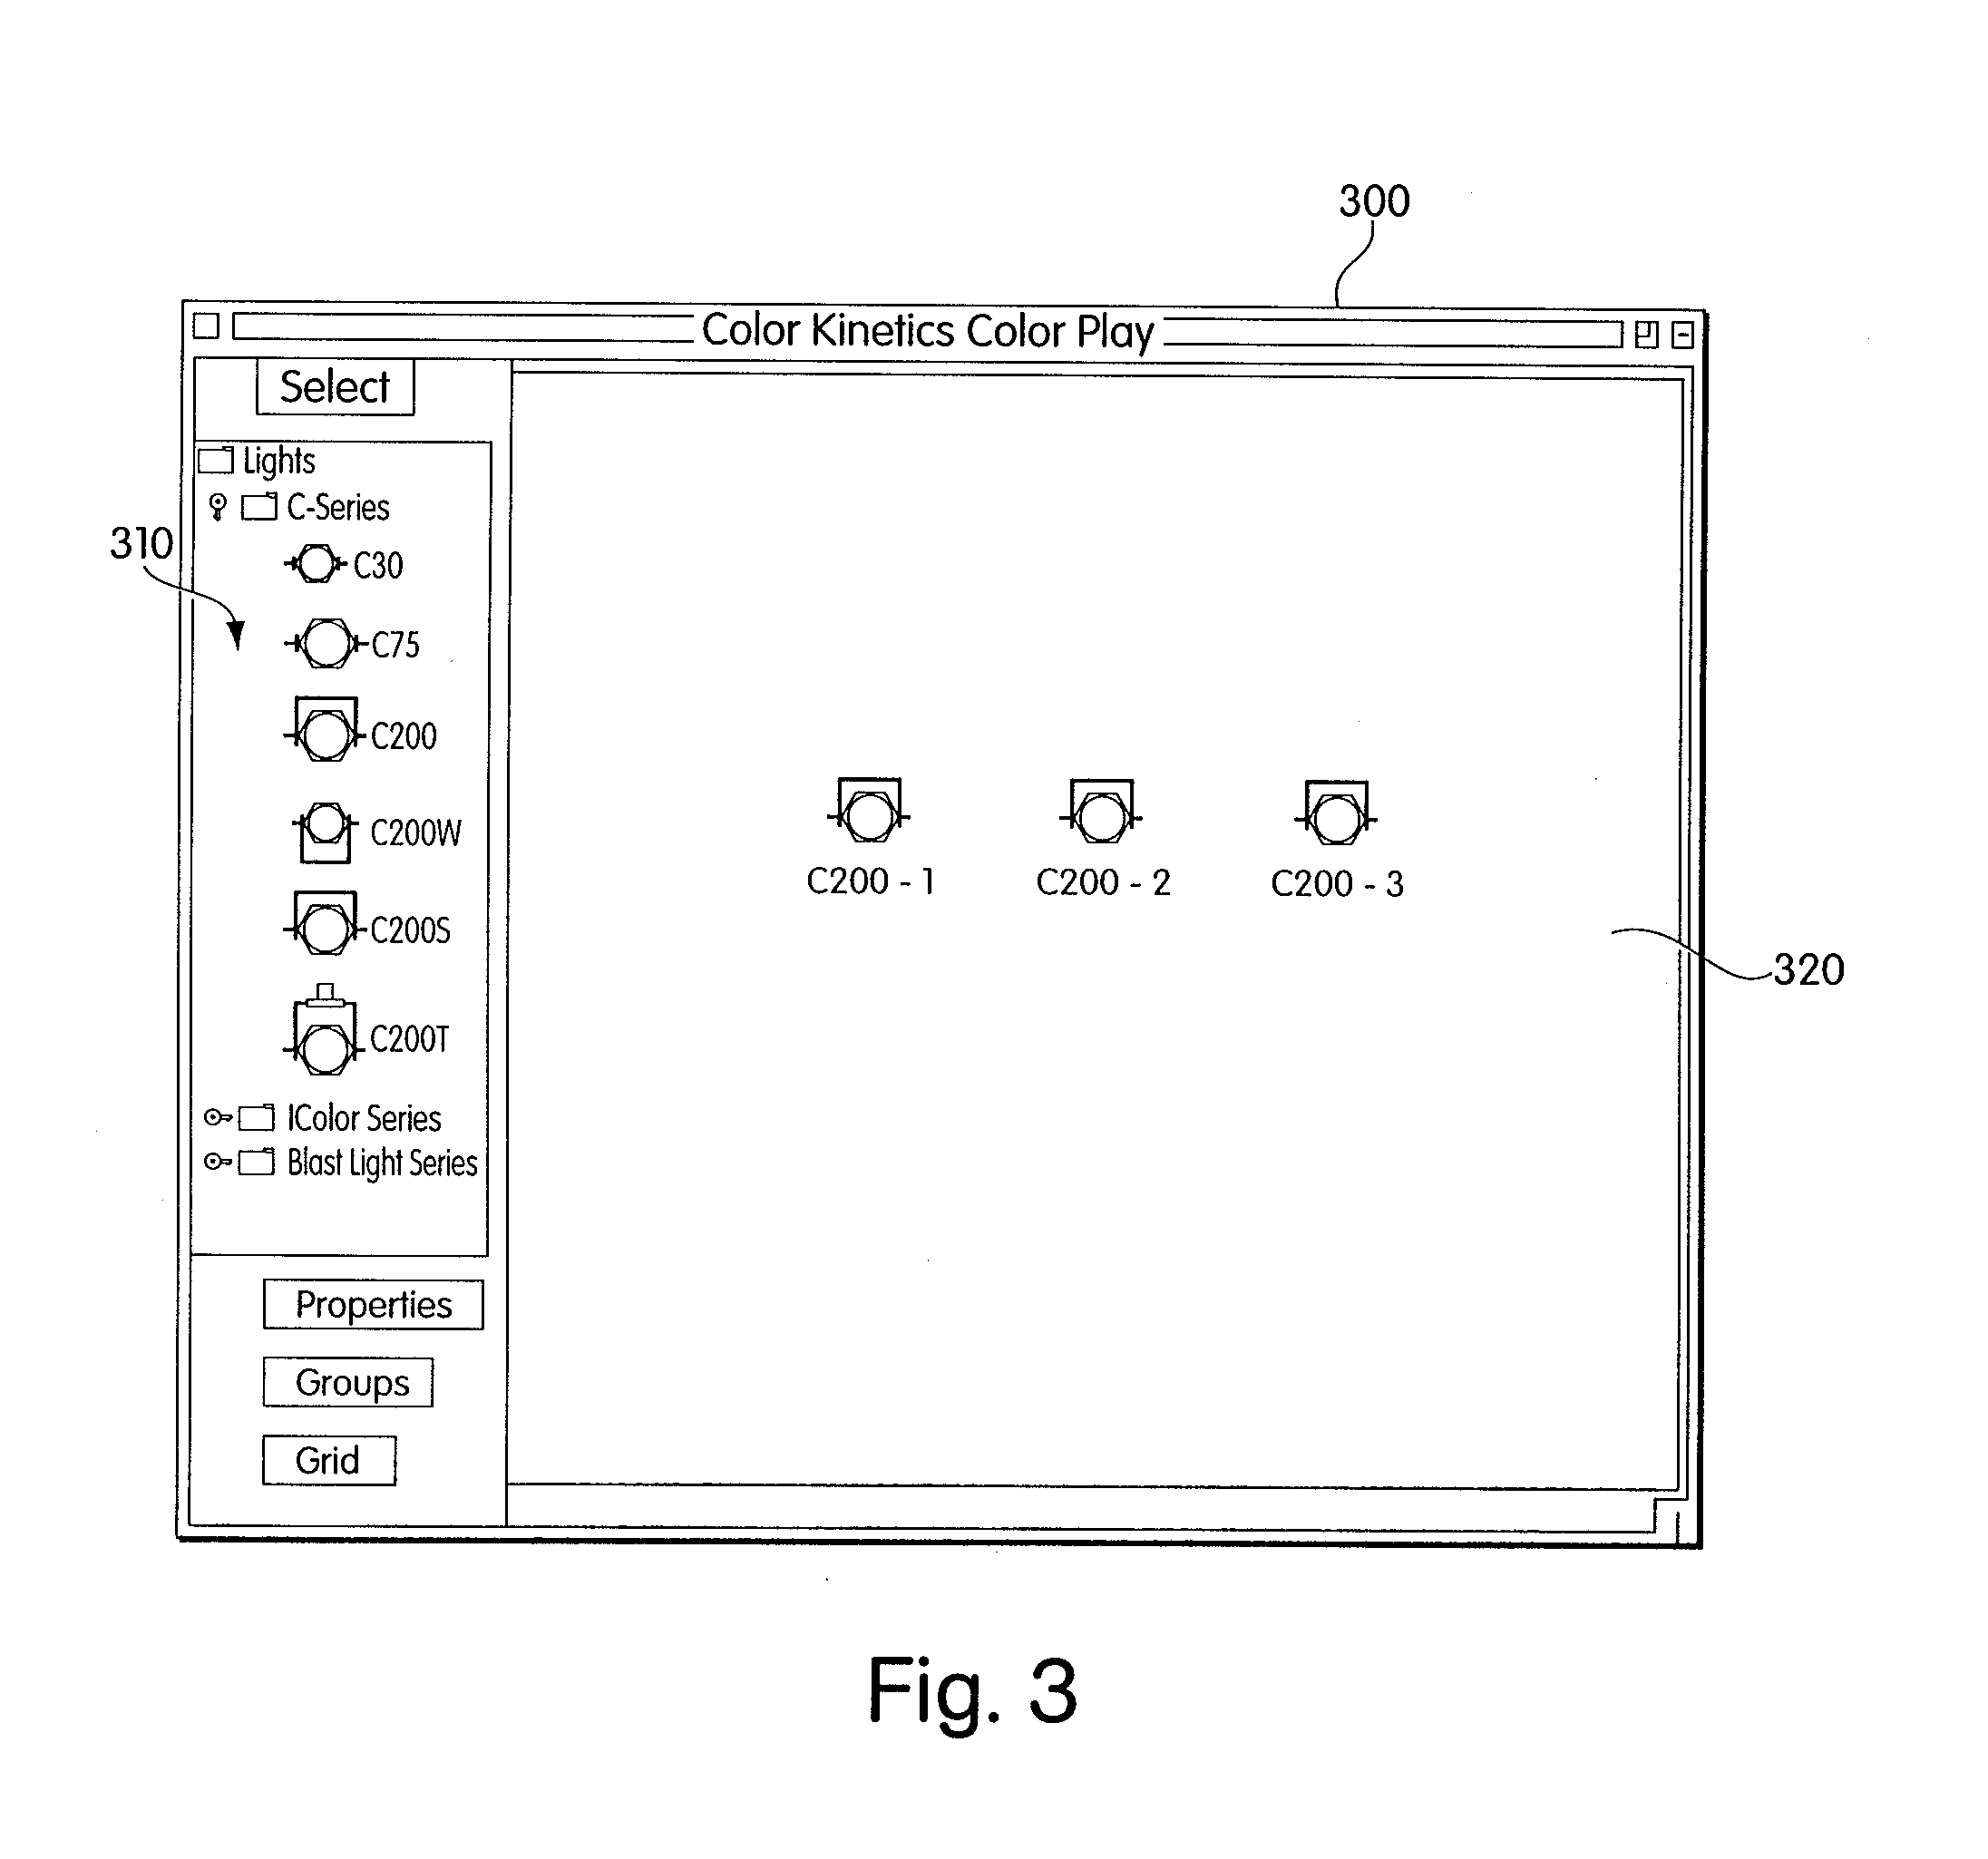 Method and apparatus for controlling a lighting system in response to an audio input